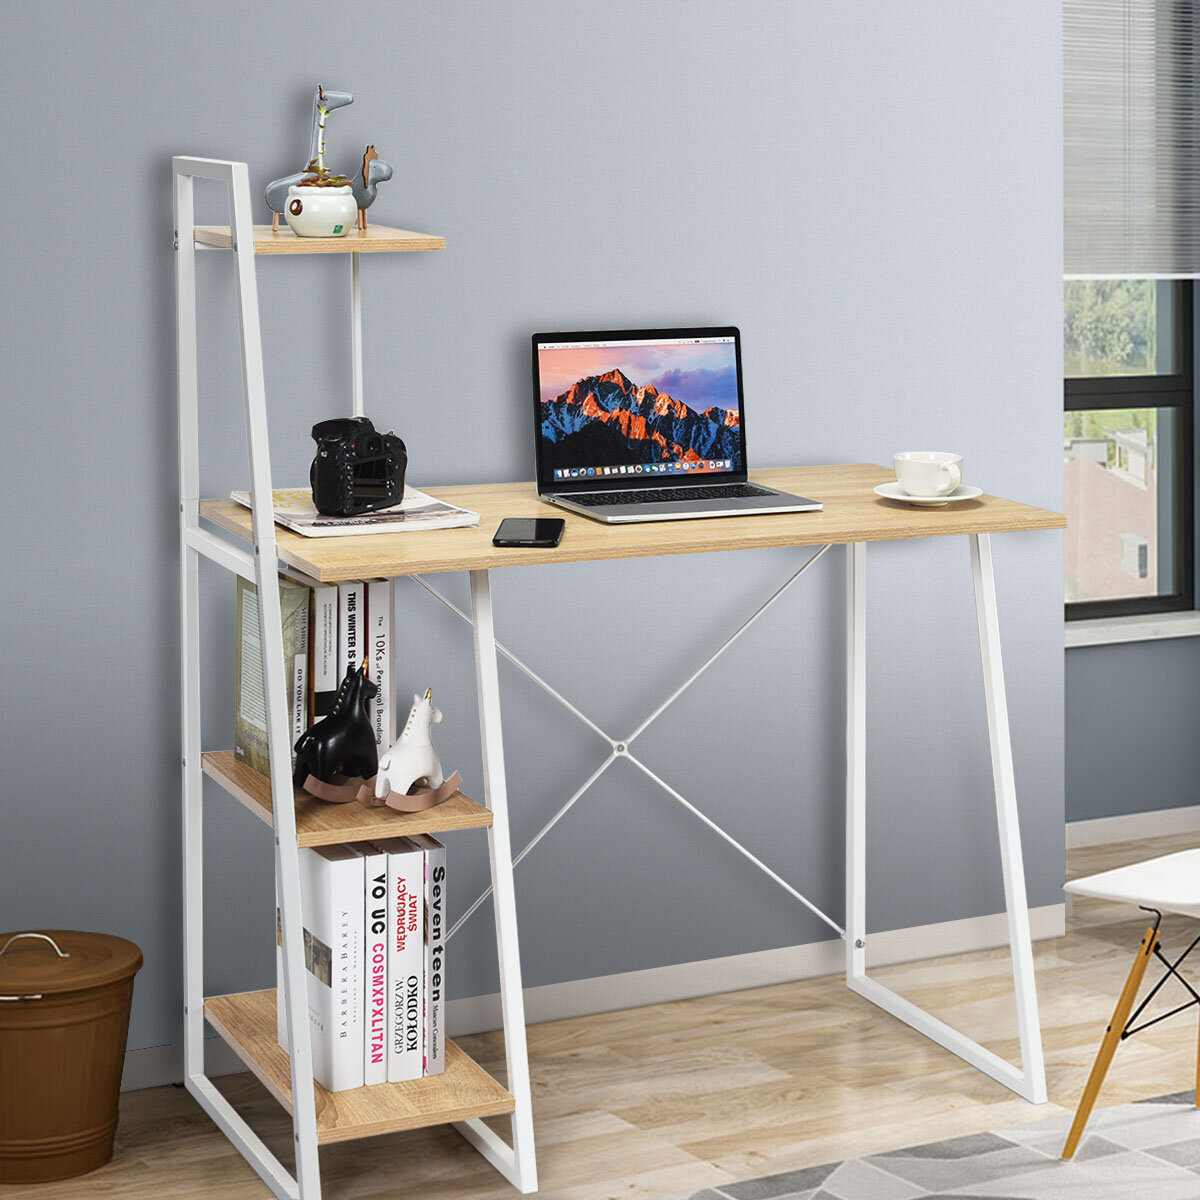 AFC Computer Desk with Slat Wall Monitor Mounts: Streamlined